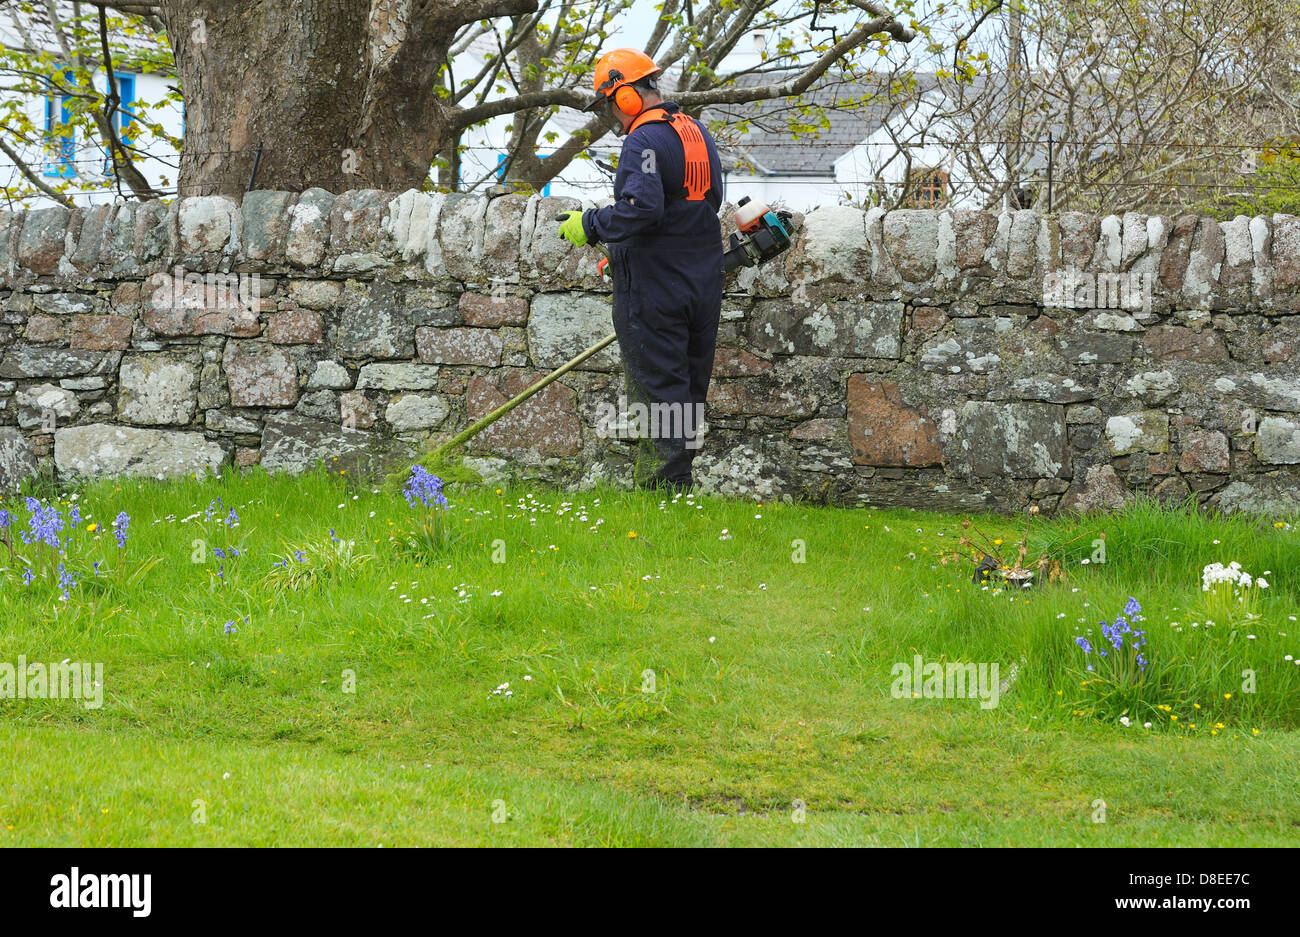 A Gardener man using a strimmer   strimming around wildflowers and stone wall. Stock Photo